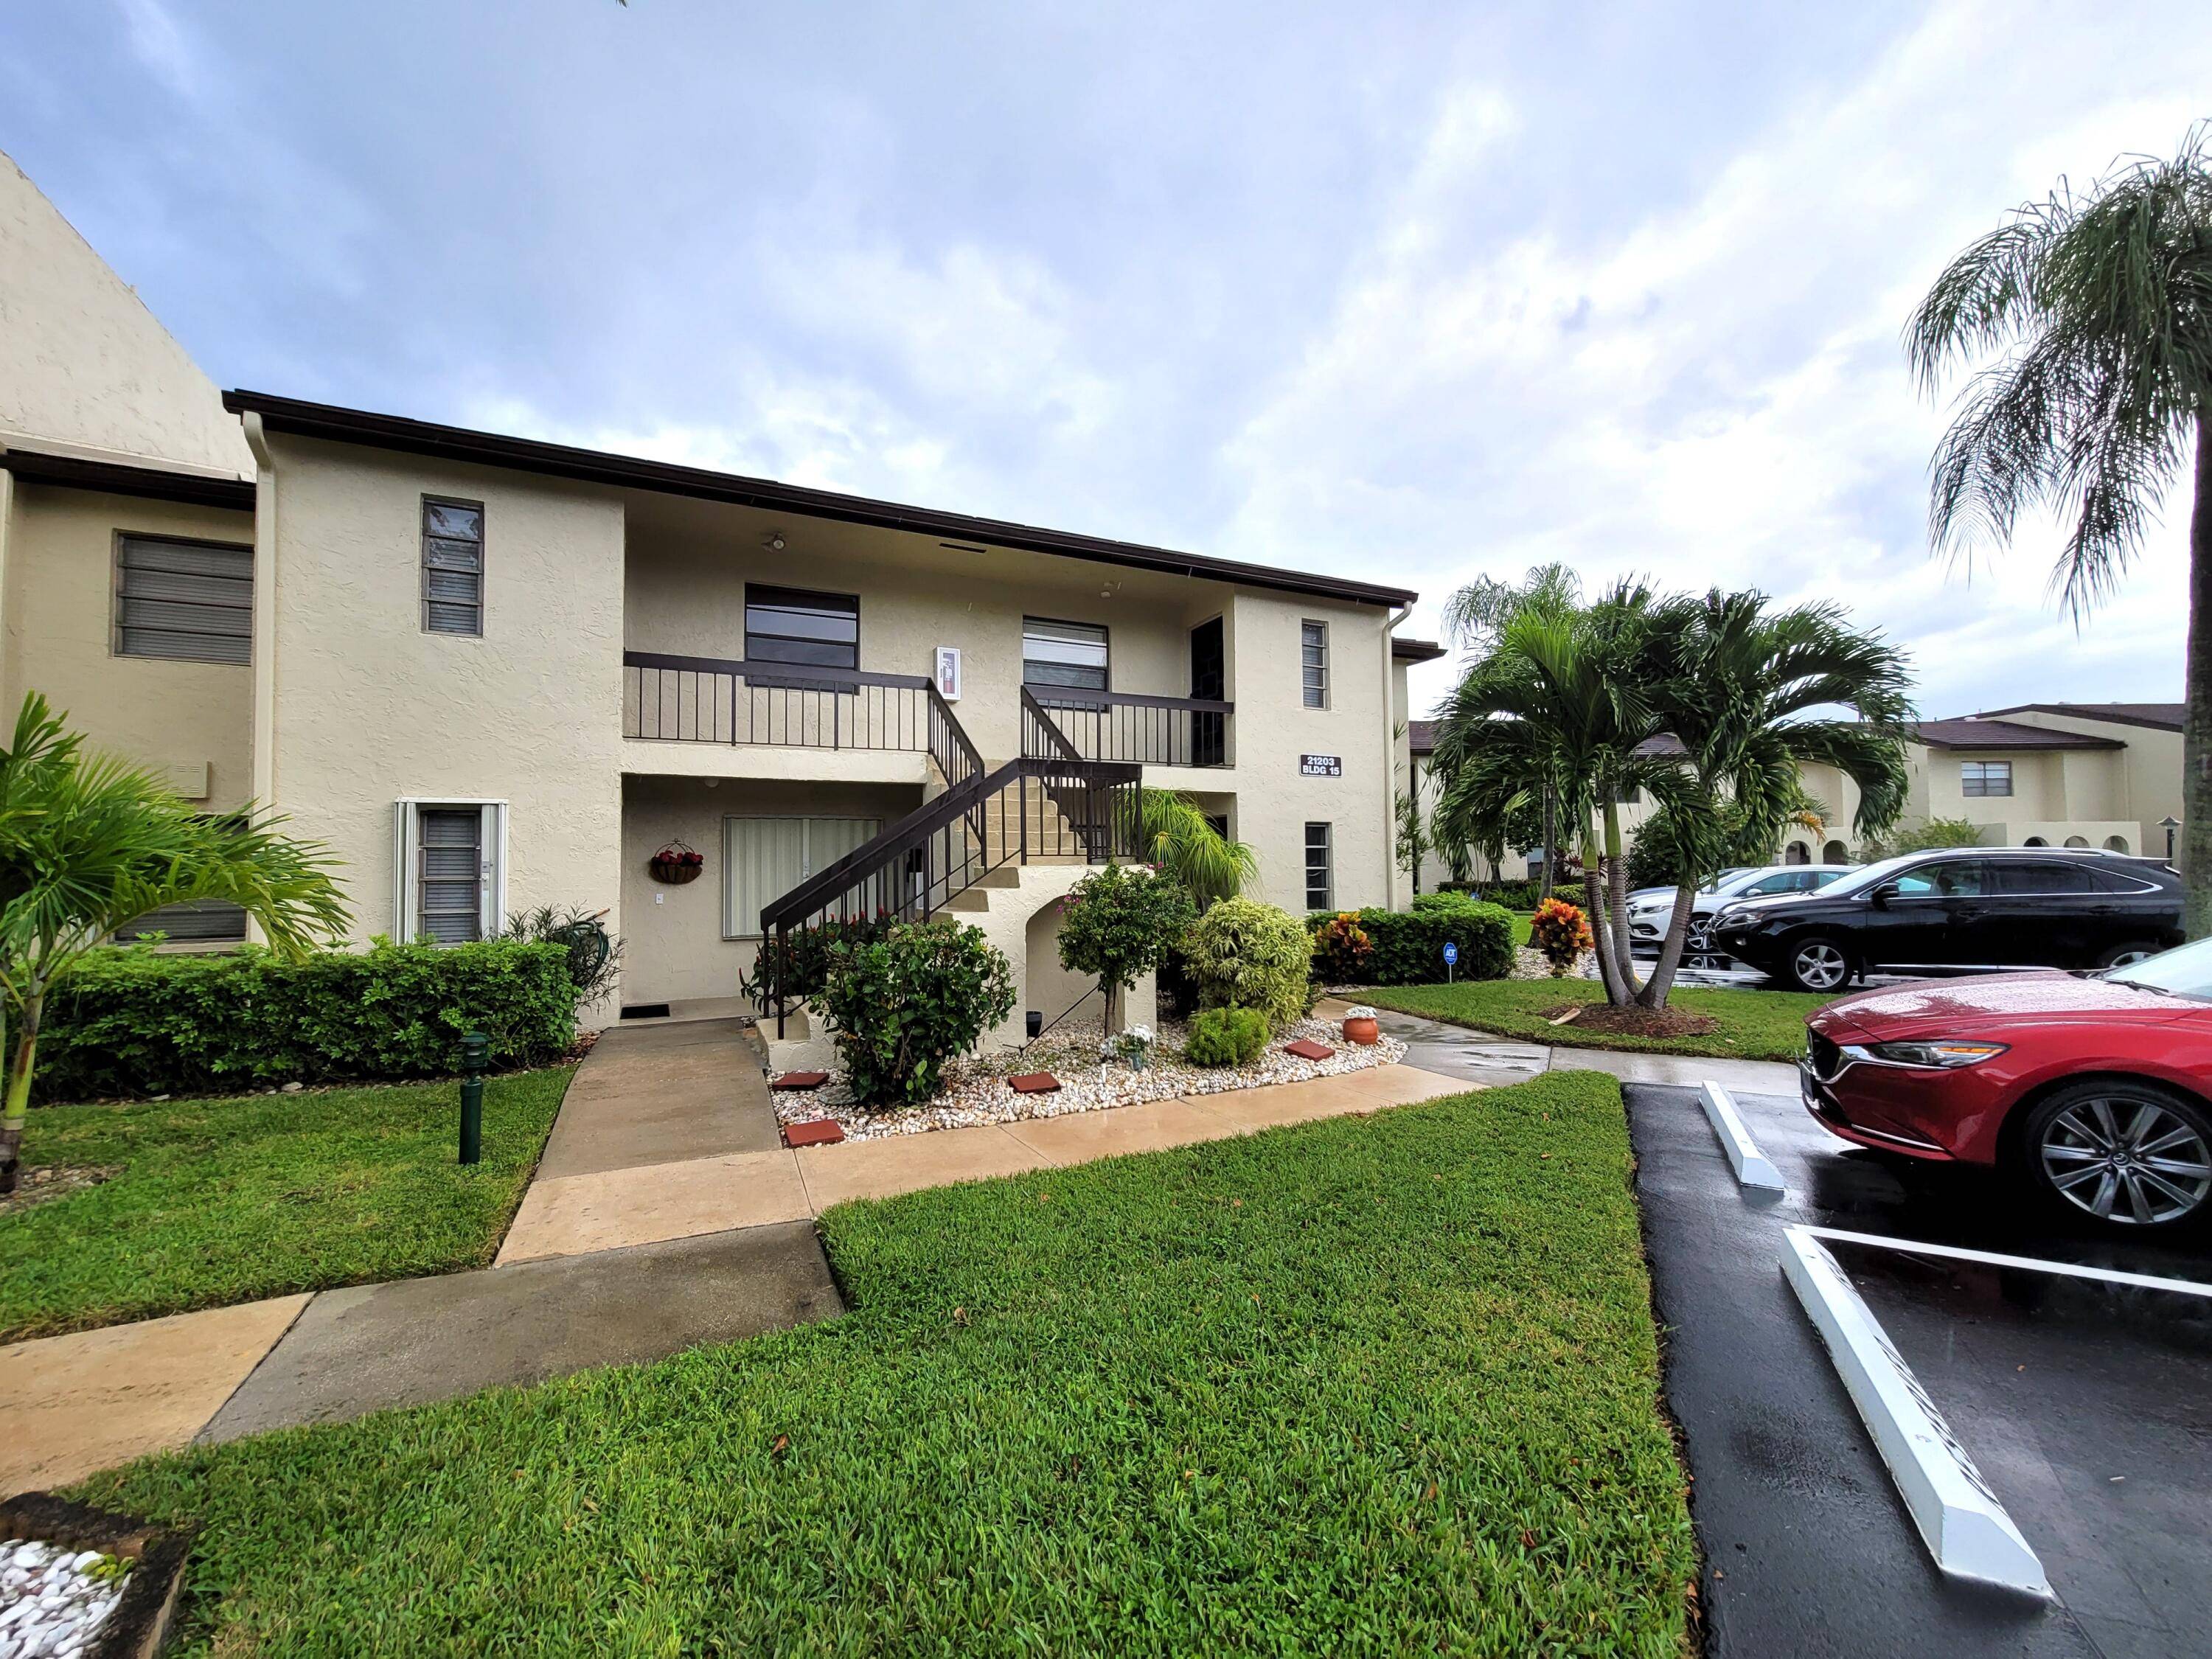 Look no further, come take a look at this beautiful furnished unfurnished condo located in the sought after Fairways of Boca Lago 55 community.